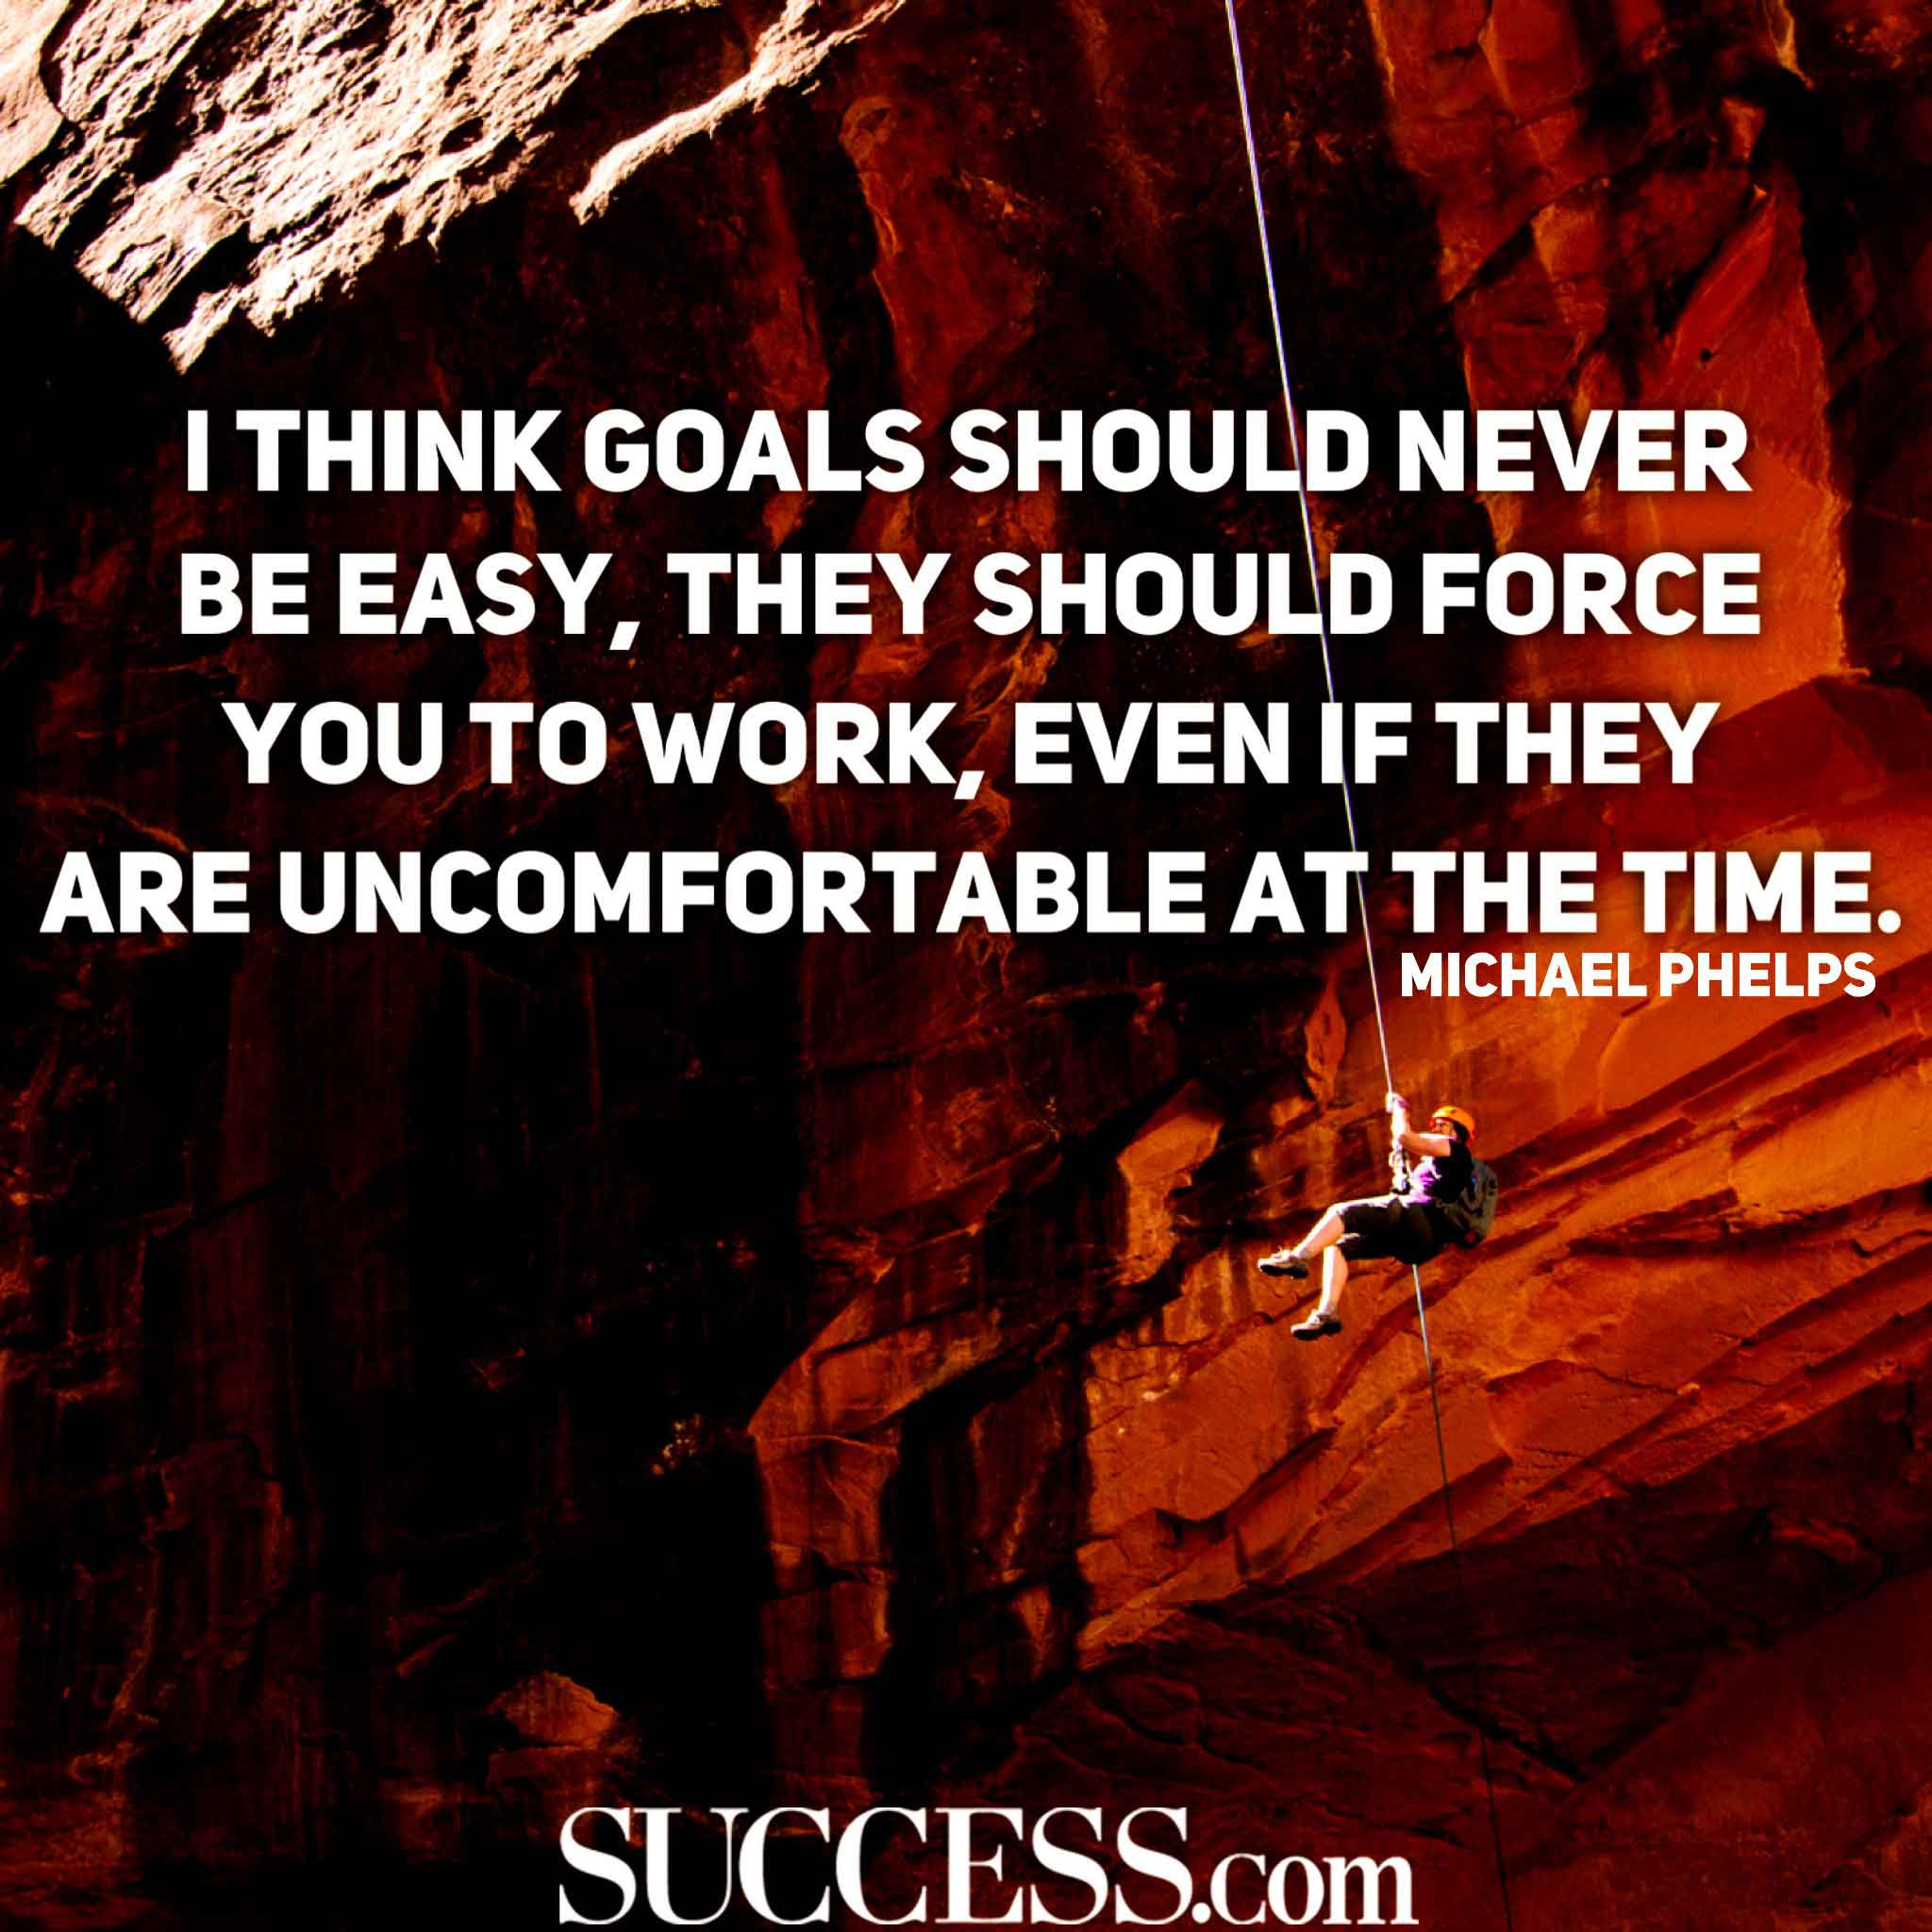 Inspirational Quotes About Goals
 18 Motivational Quotes About Successful Goal Setting